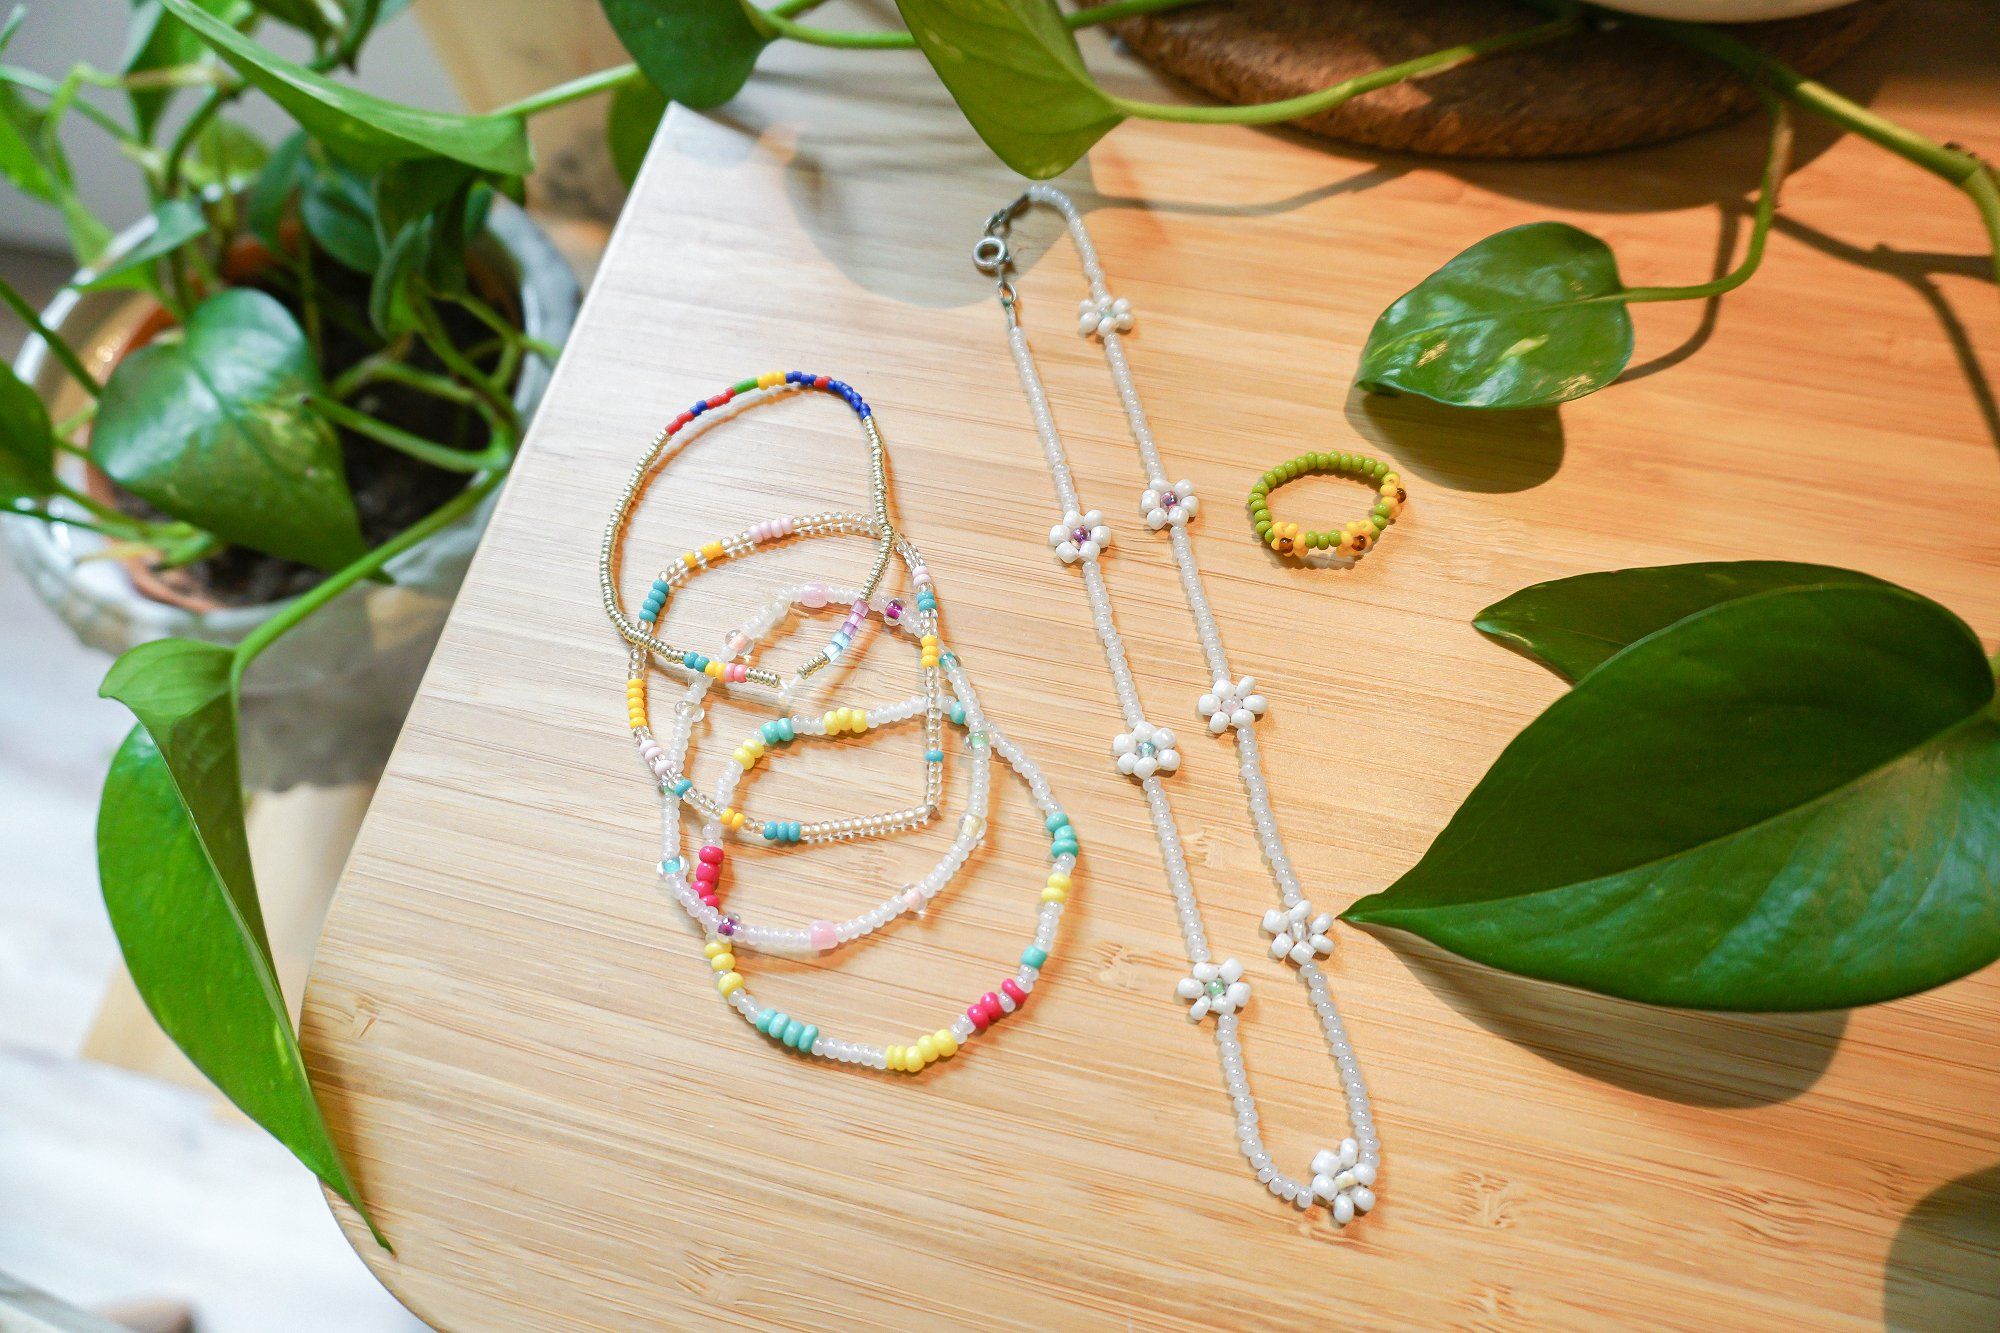 Beaded necklace and bracelets lying on the desk, surrounded by green leaves of indoor plants